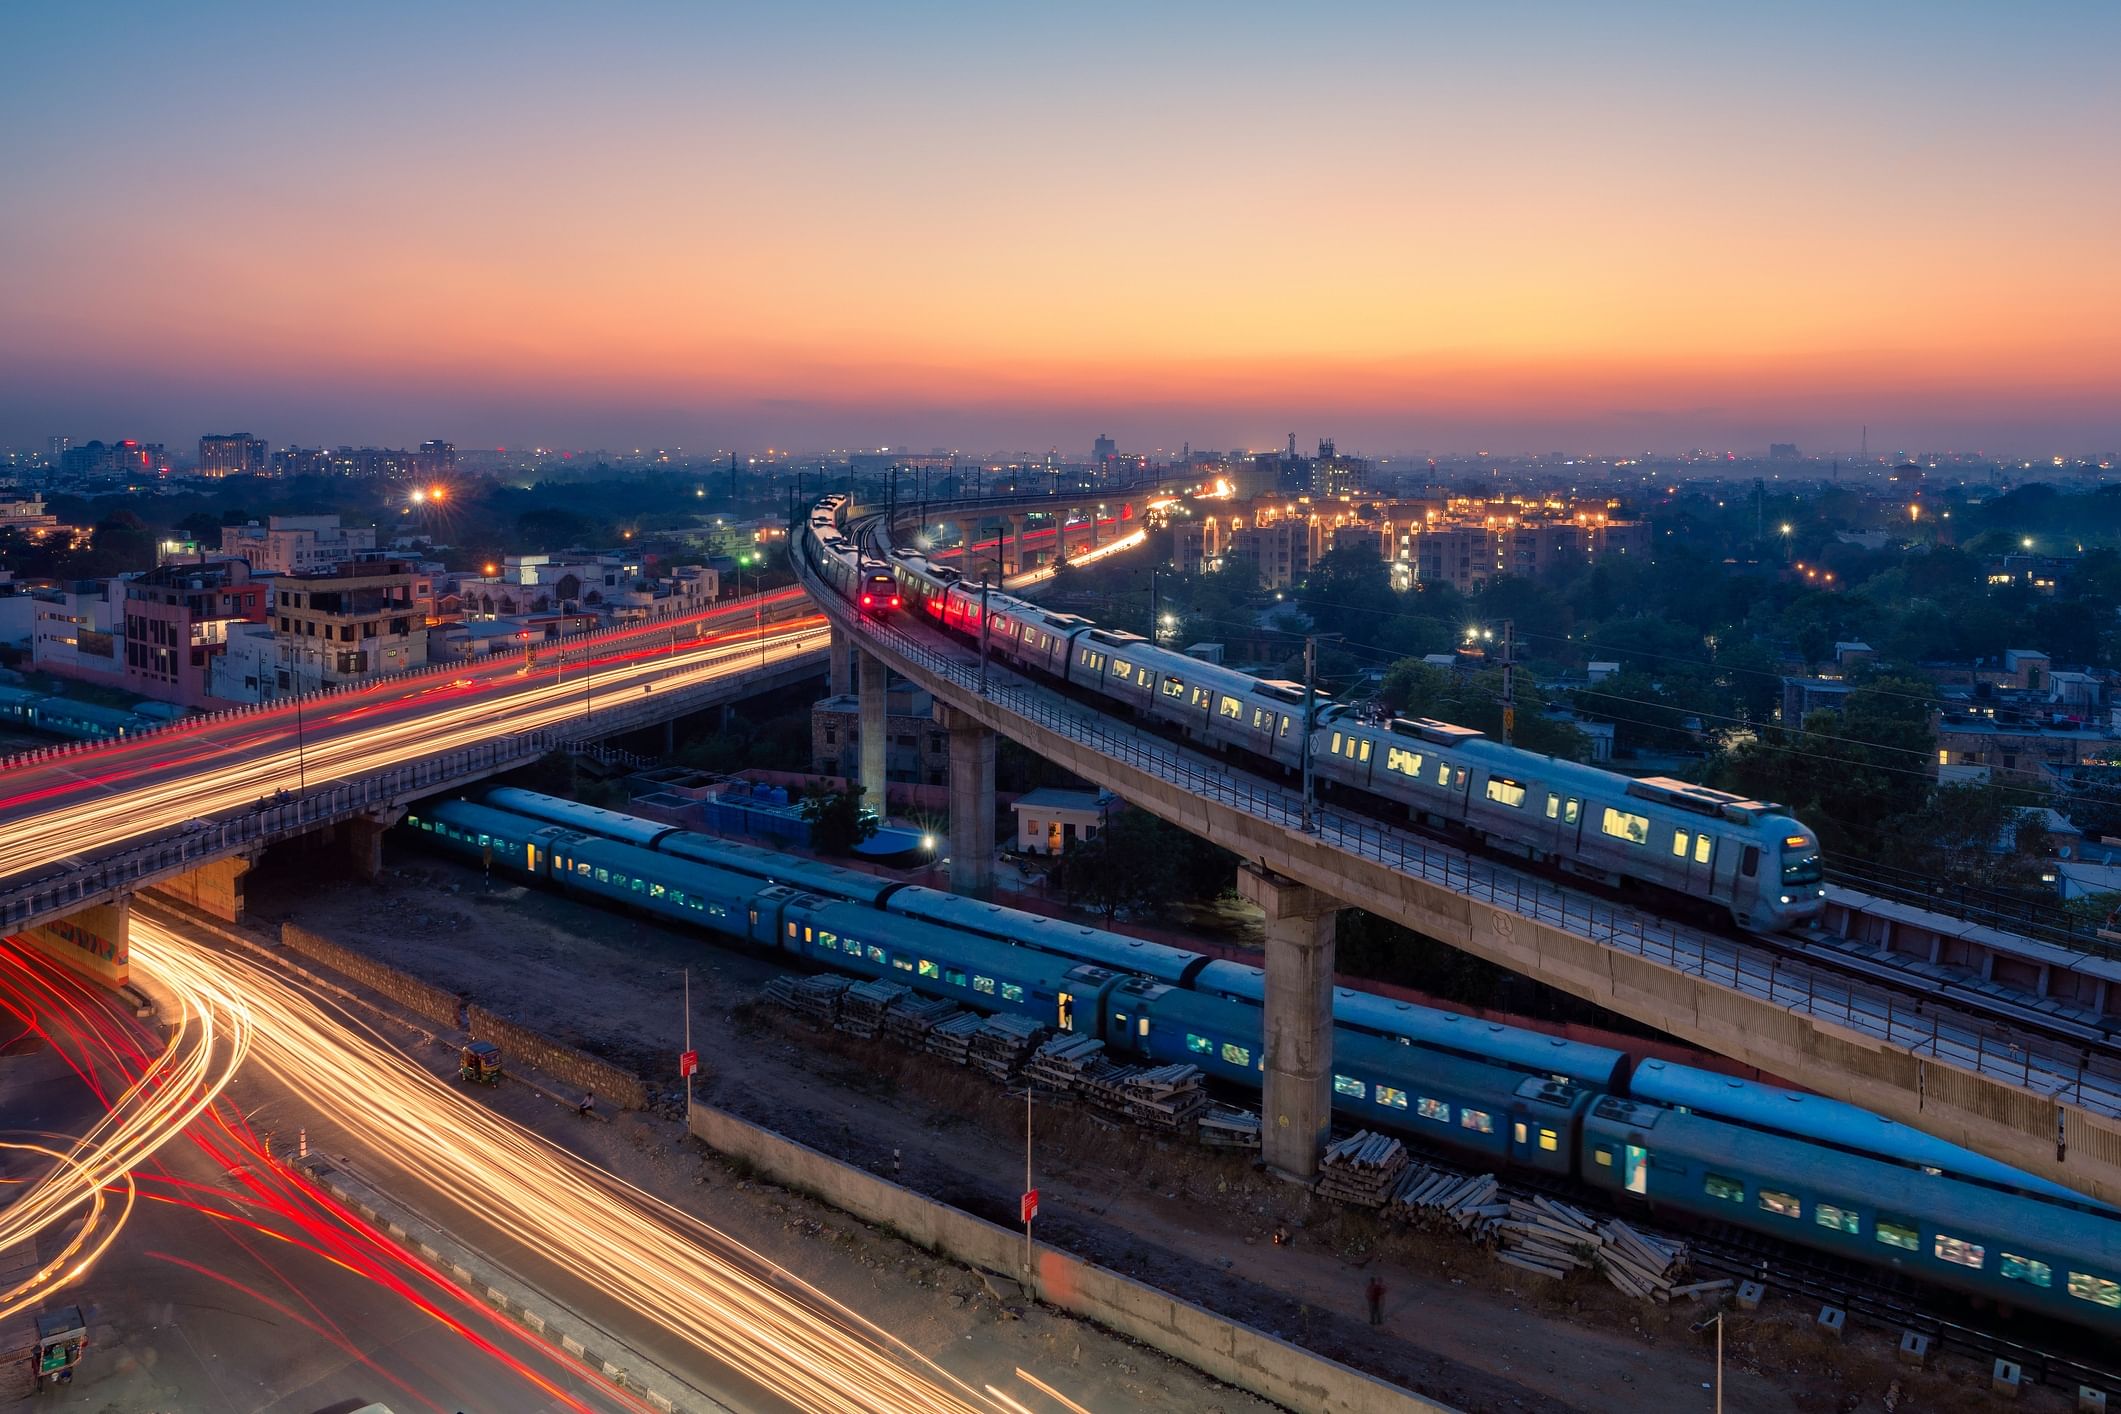 With the poor connectivity, power shortages, inadequate transport hit the overall growth performance, the Economic Survey says there is need to invest on improving infrastructure. (Representative Image/iStock image)